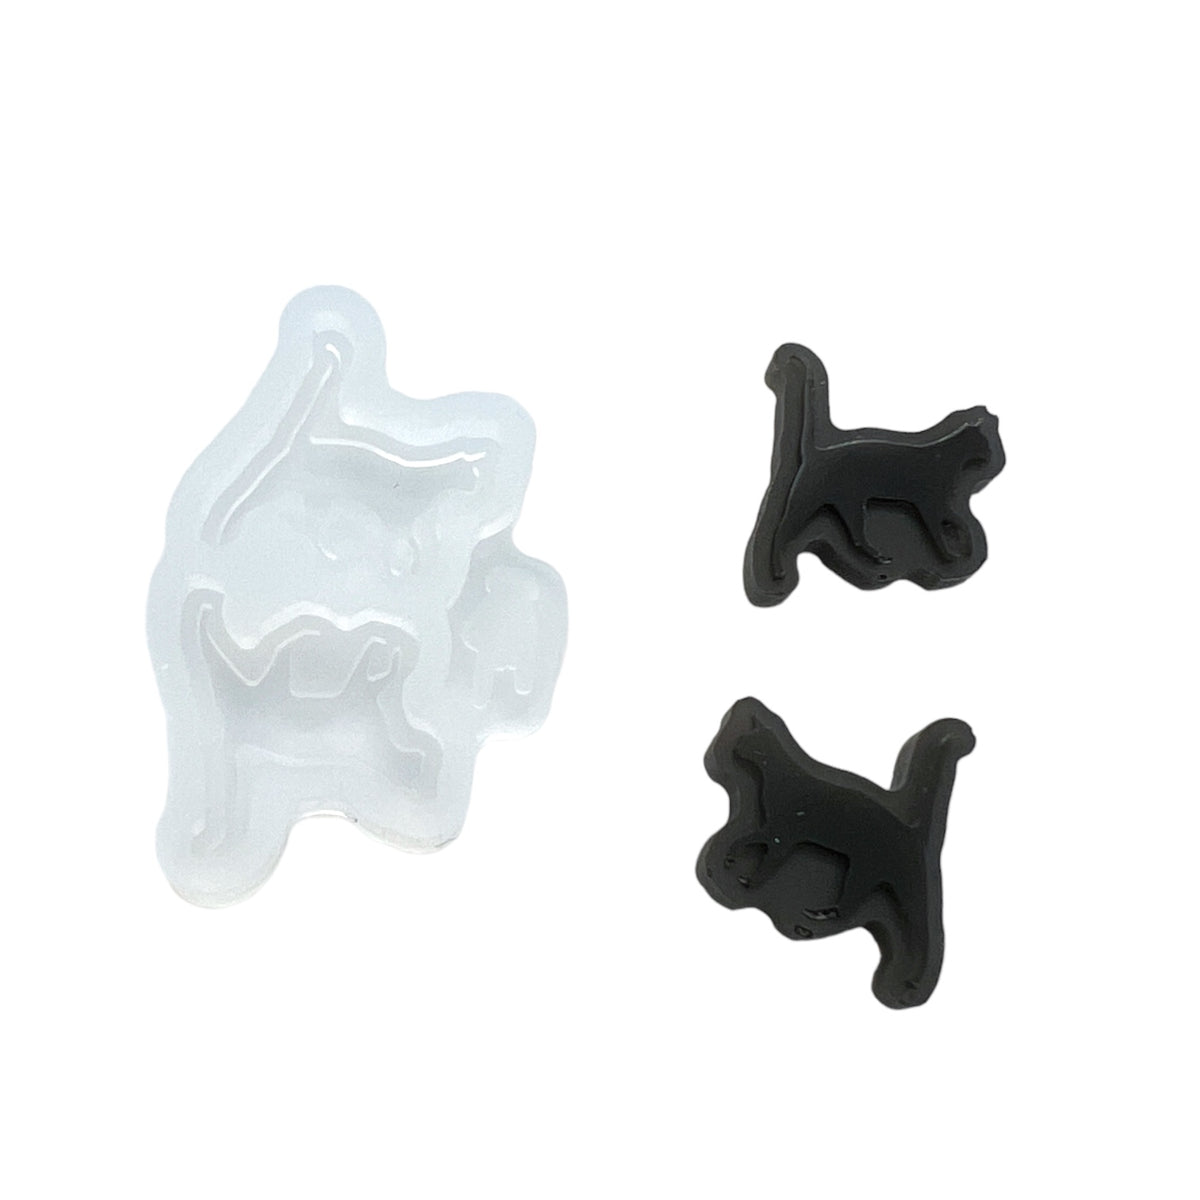 Tiny Cat Resin Rockers Exclusive Stud Earring Mold for UV and Epoxy Resin